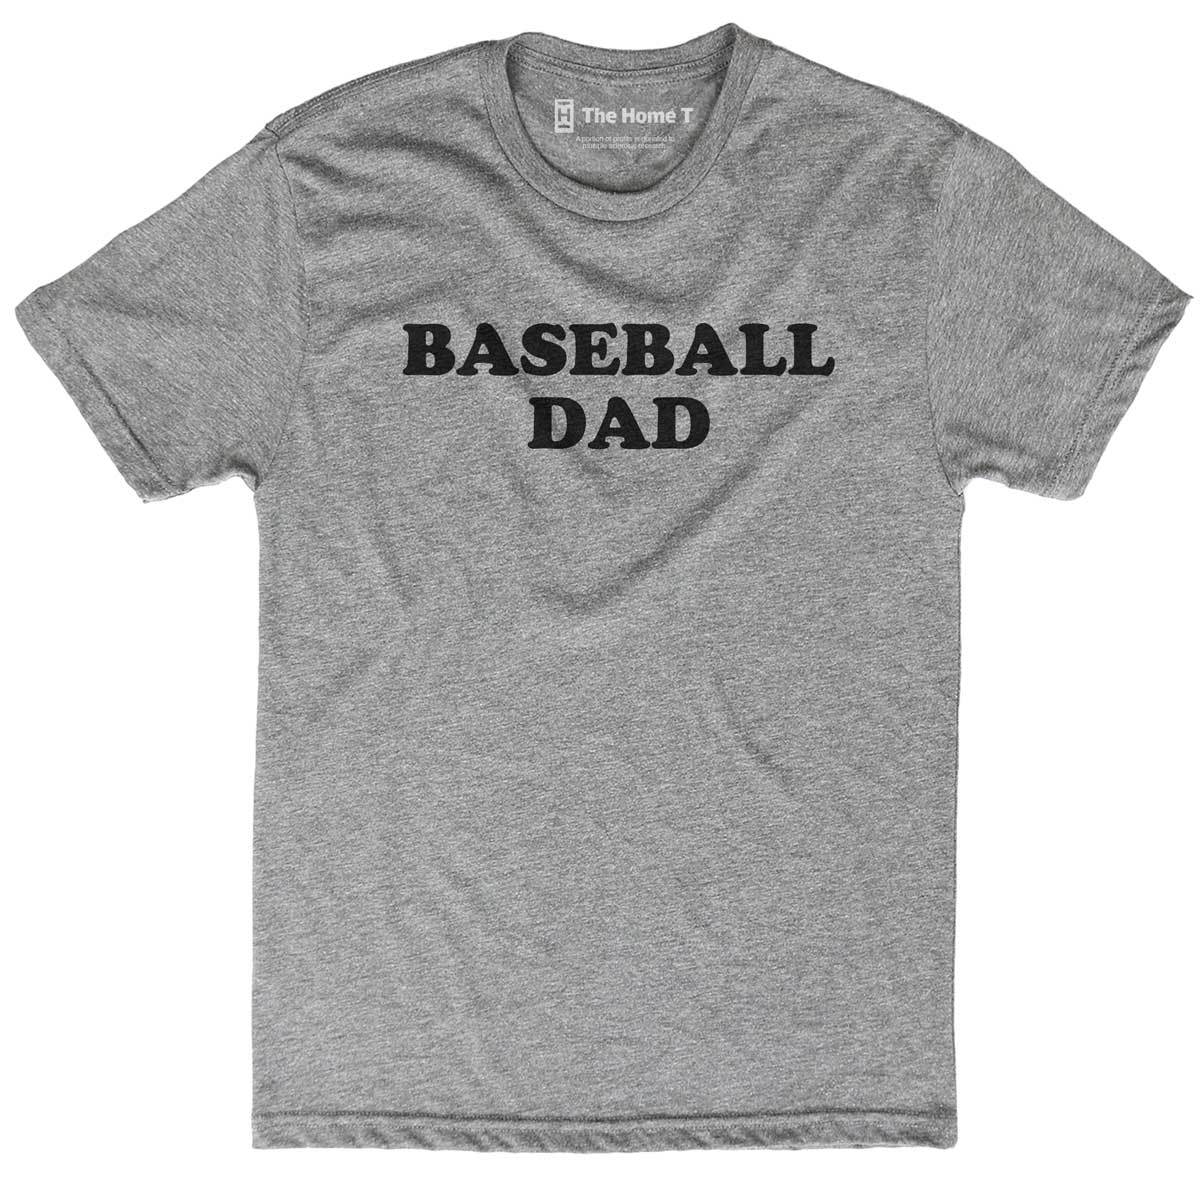 Baseball Parent Crew neck The Home T XS Dad